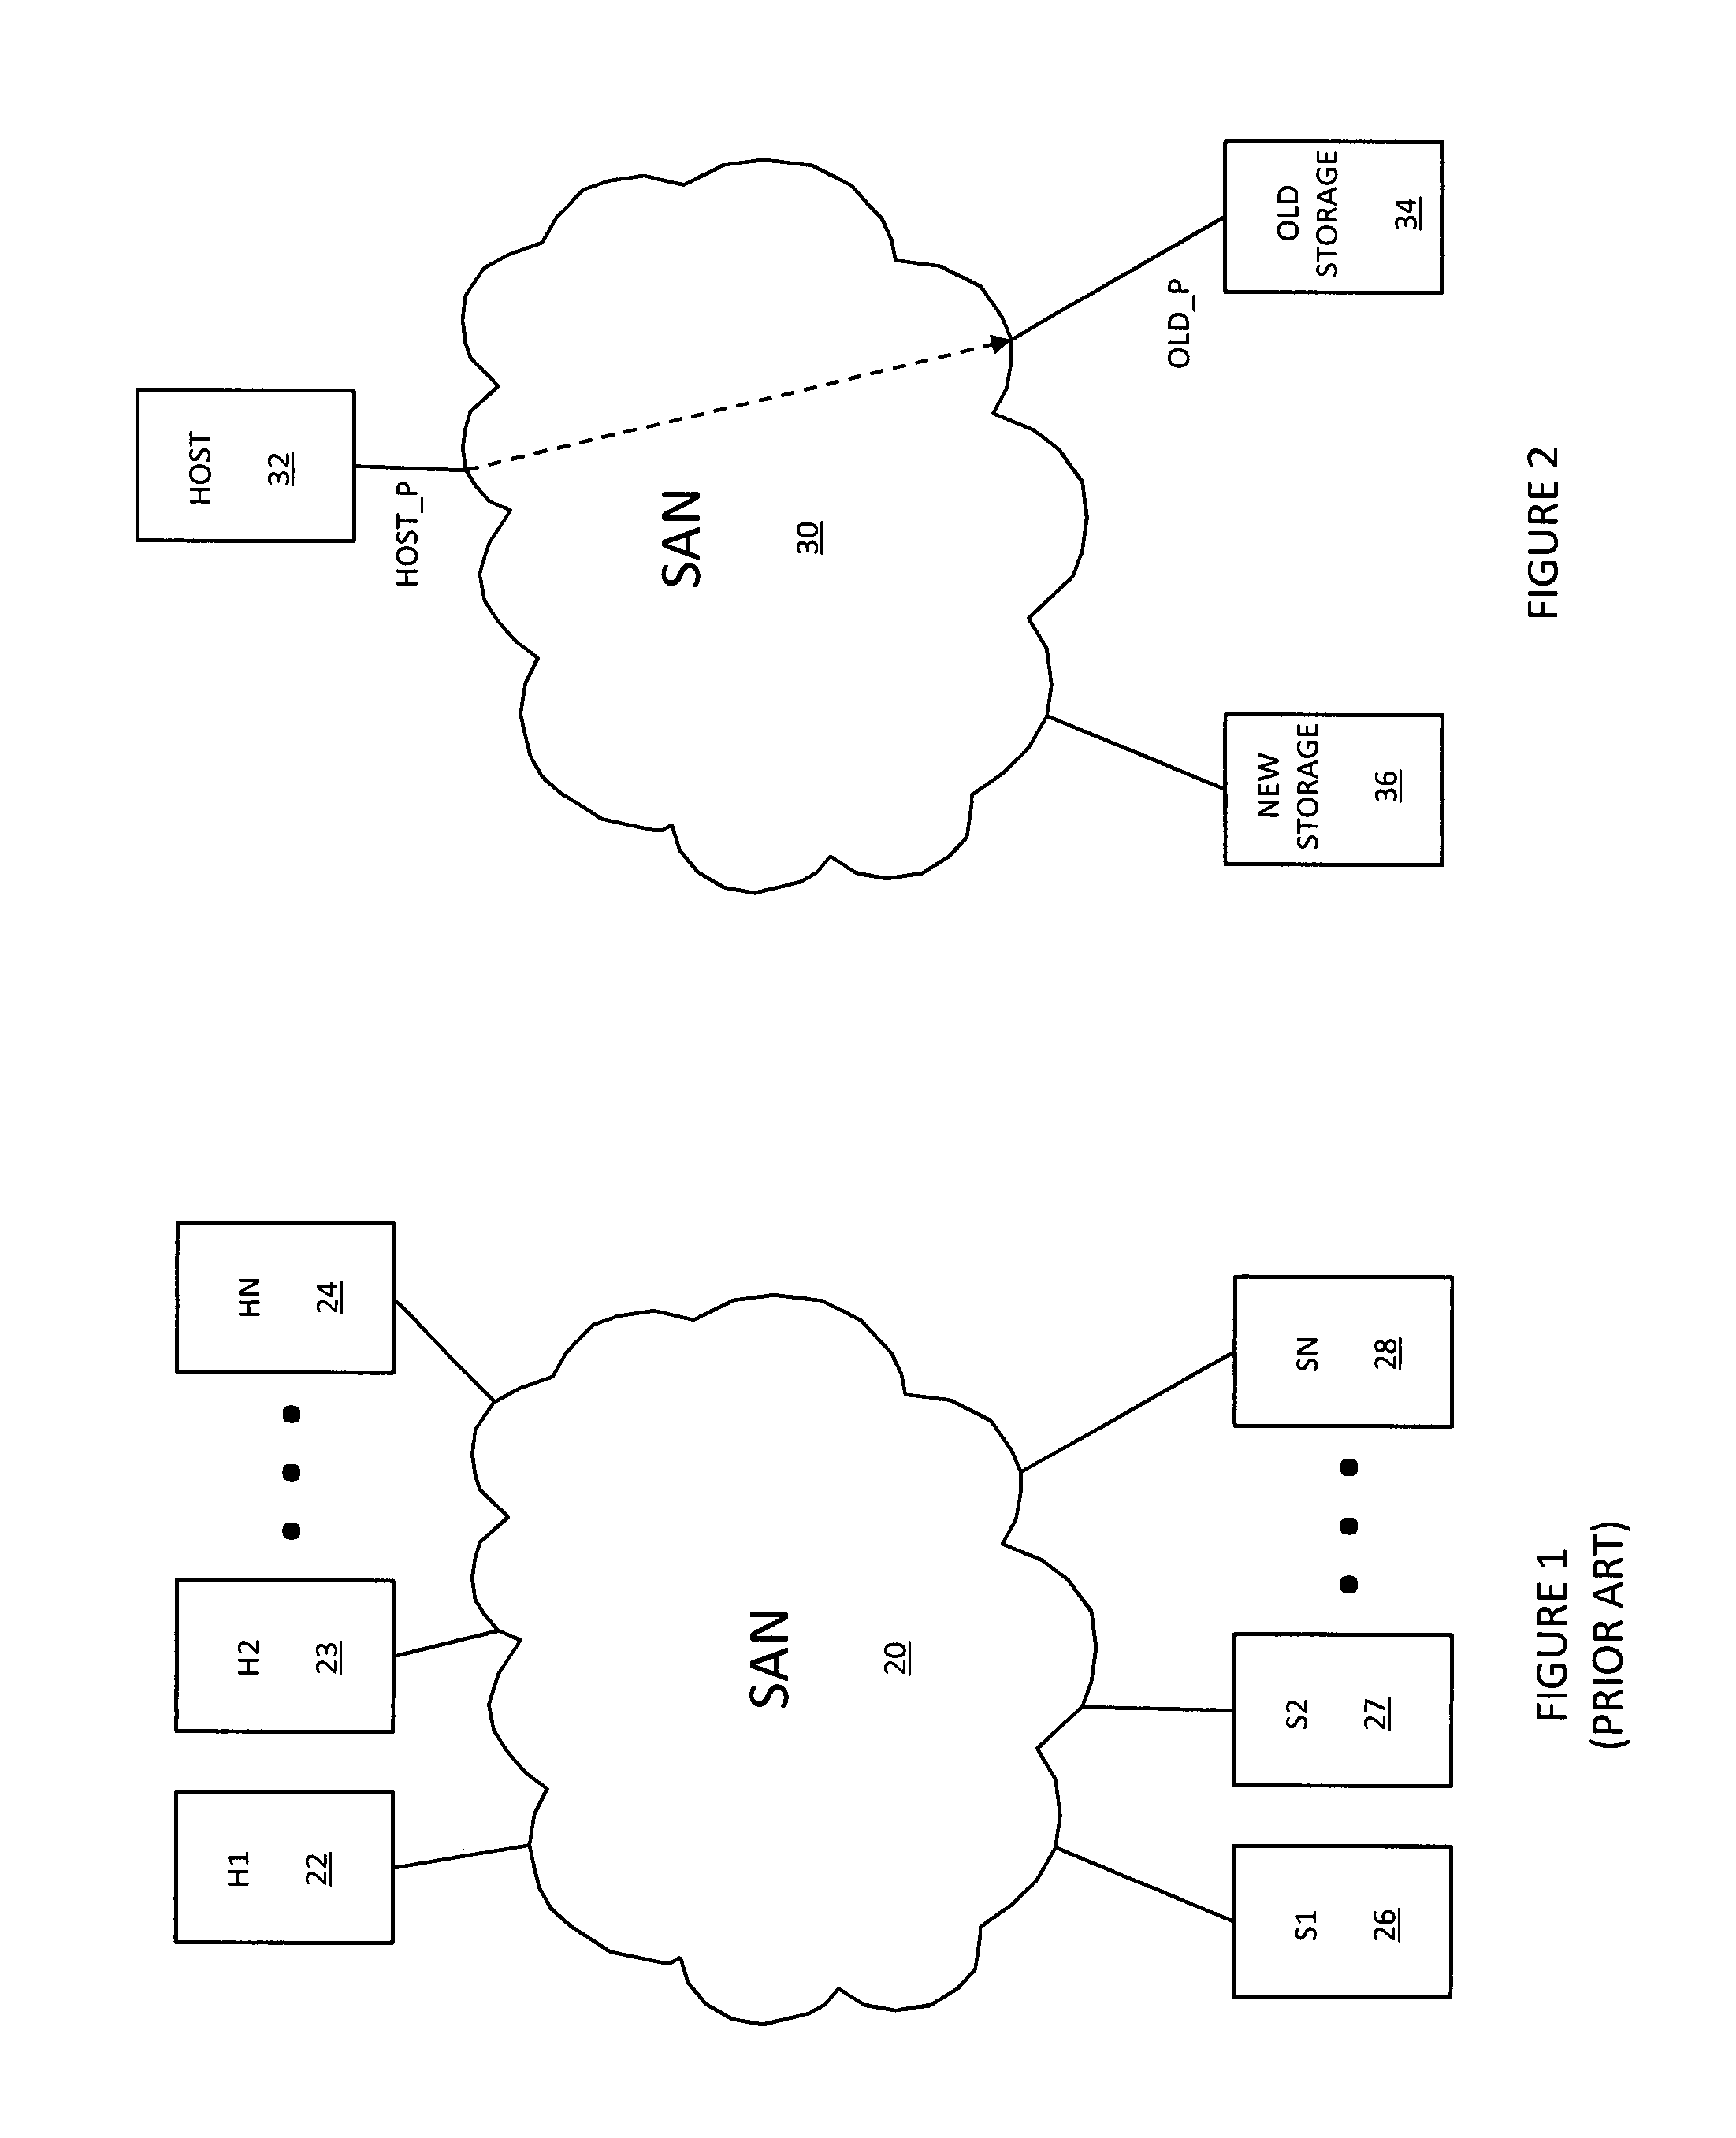 Non-disruptive data migration among storage devices using integrated virtualization engine of a storage device